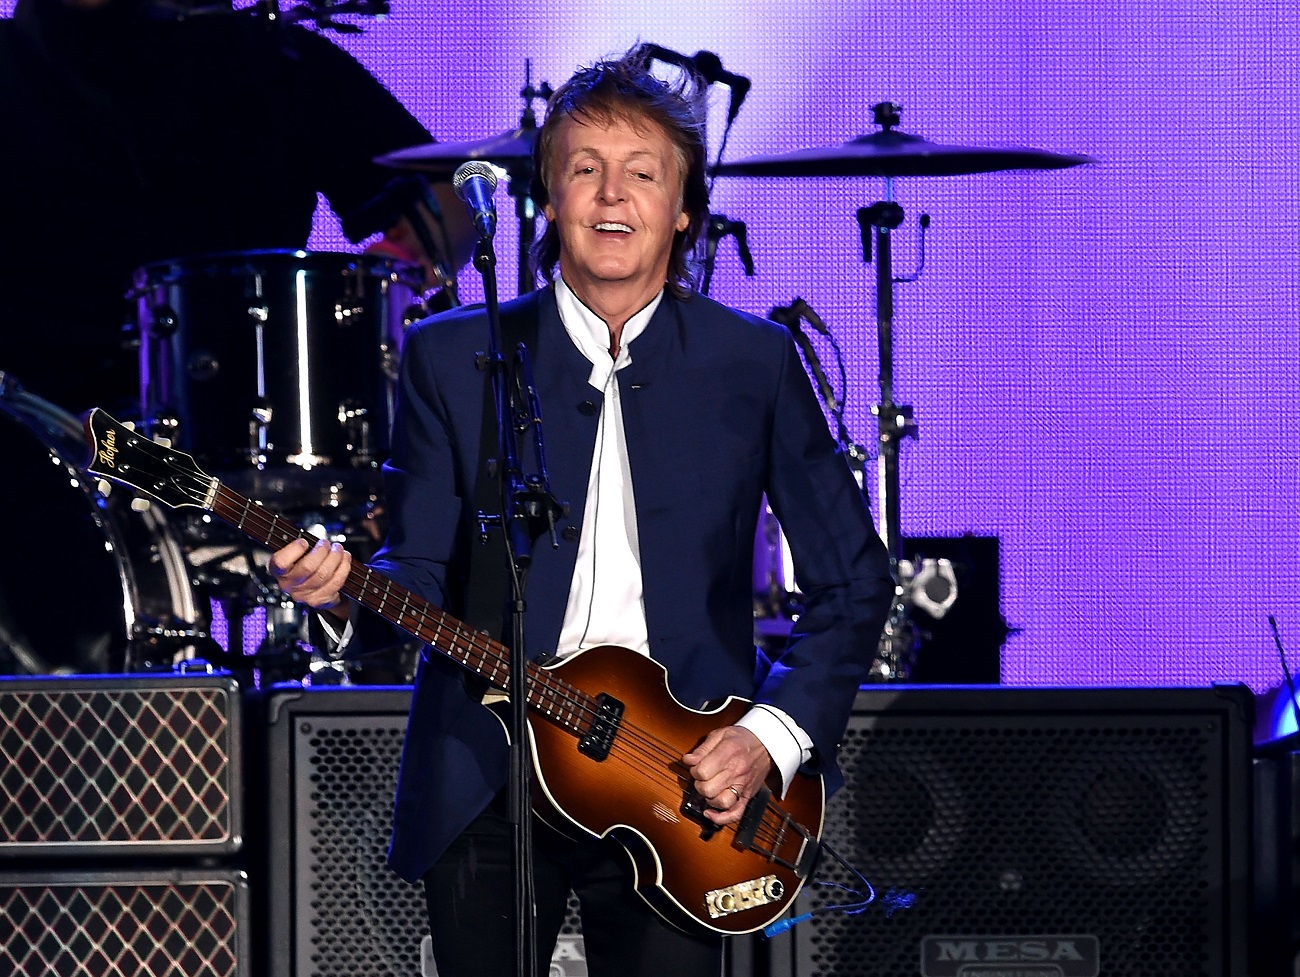 Paul McCartney stands on a stage and plays the guitar.